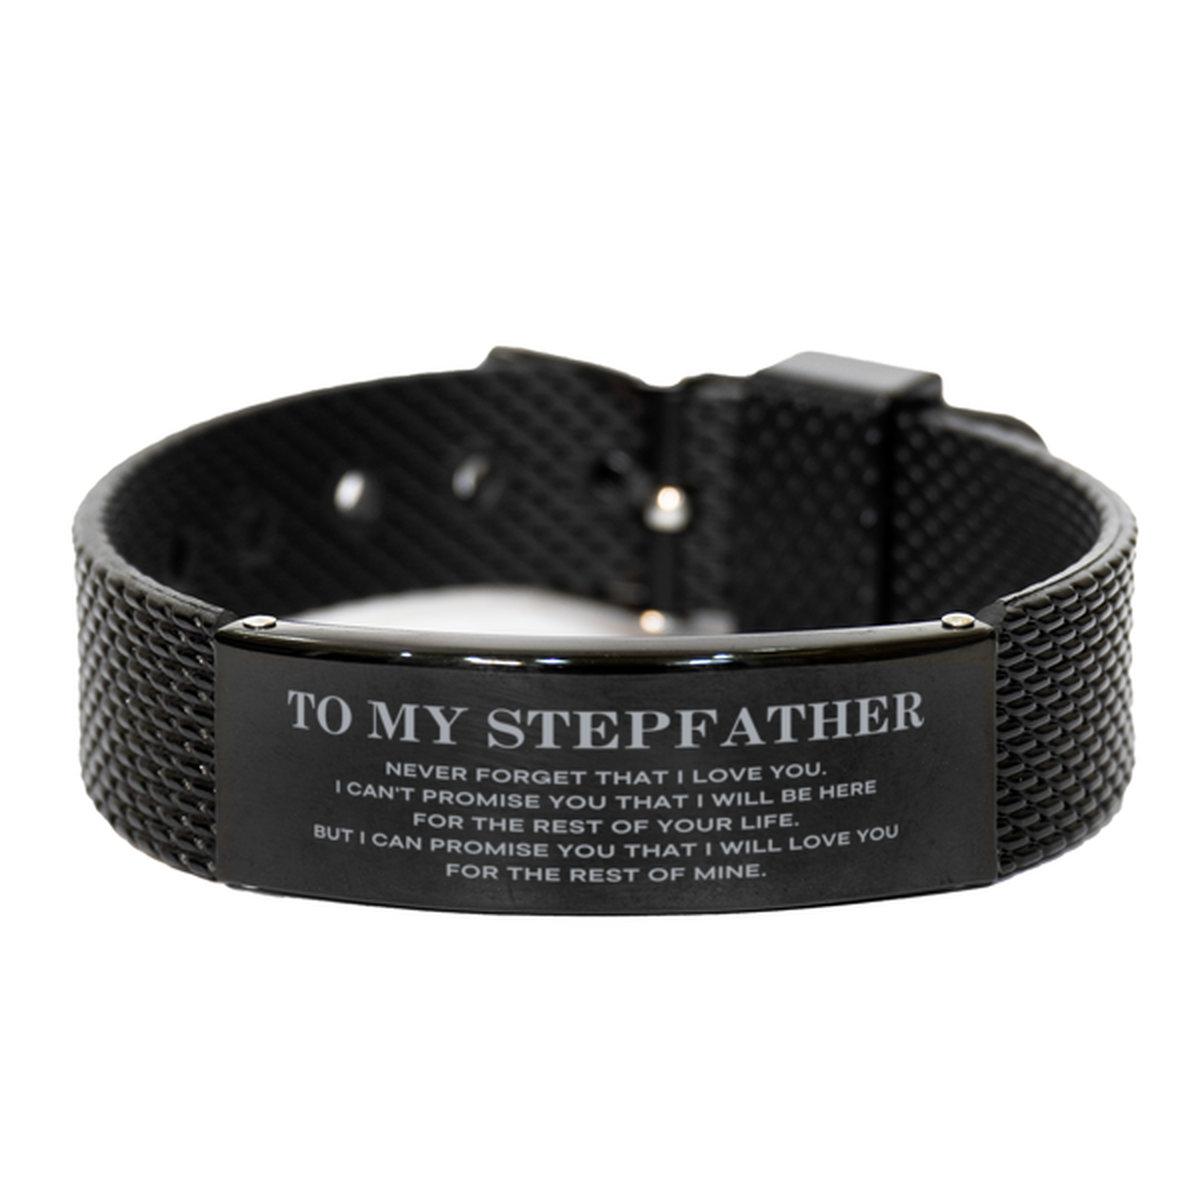 To My Stepfather Gifts, I will love you for the rest of mine, Love Stepfather Bracelet, Birthday Christmas Unique Black Shark Mesh Bracelet For Stepfather